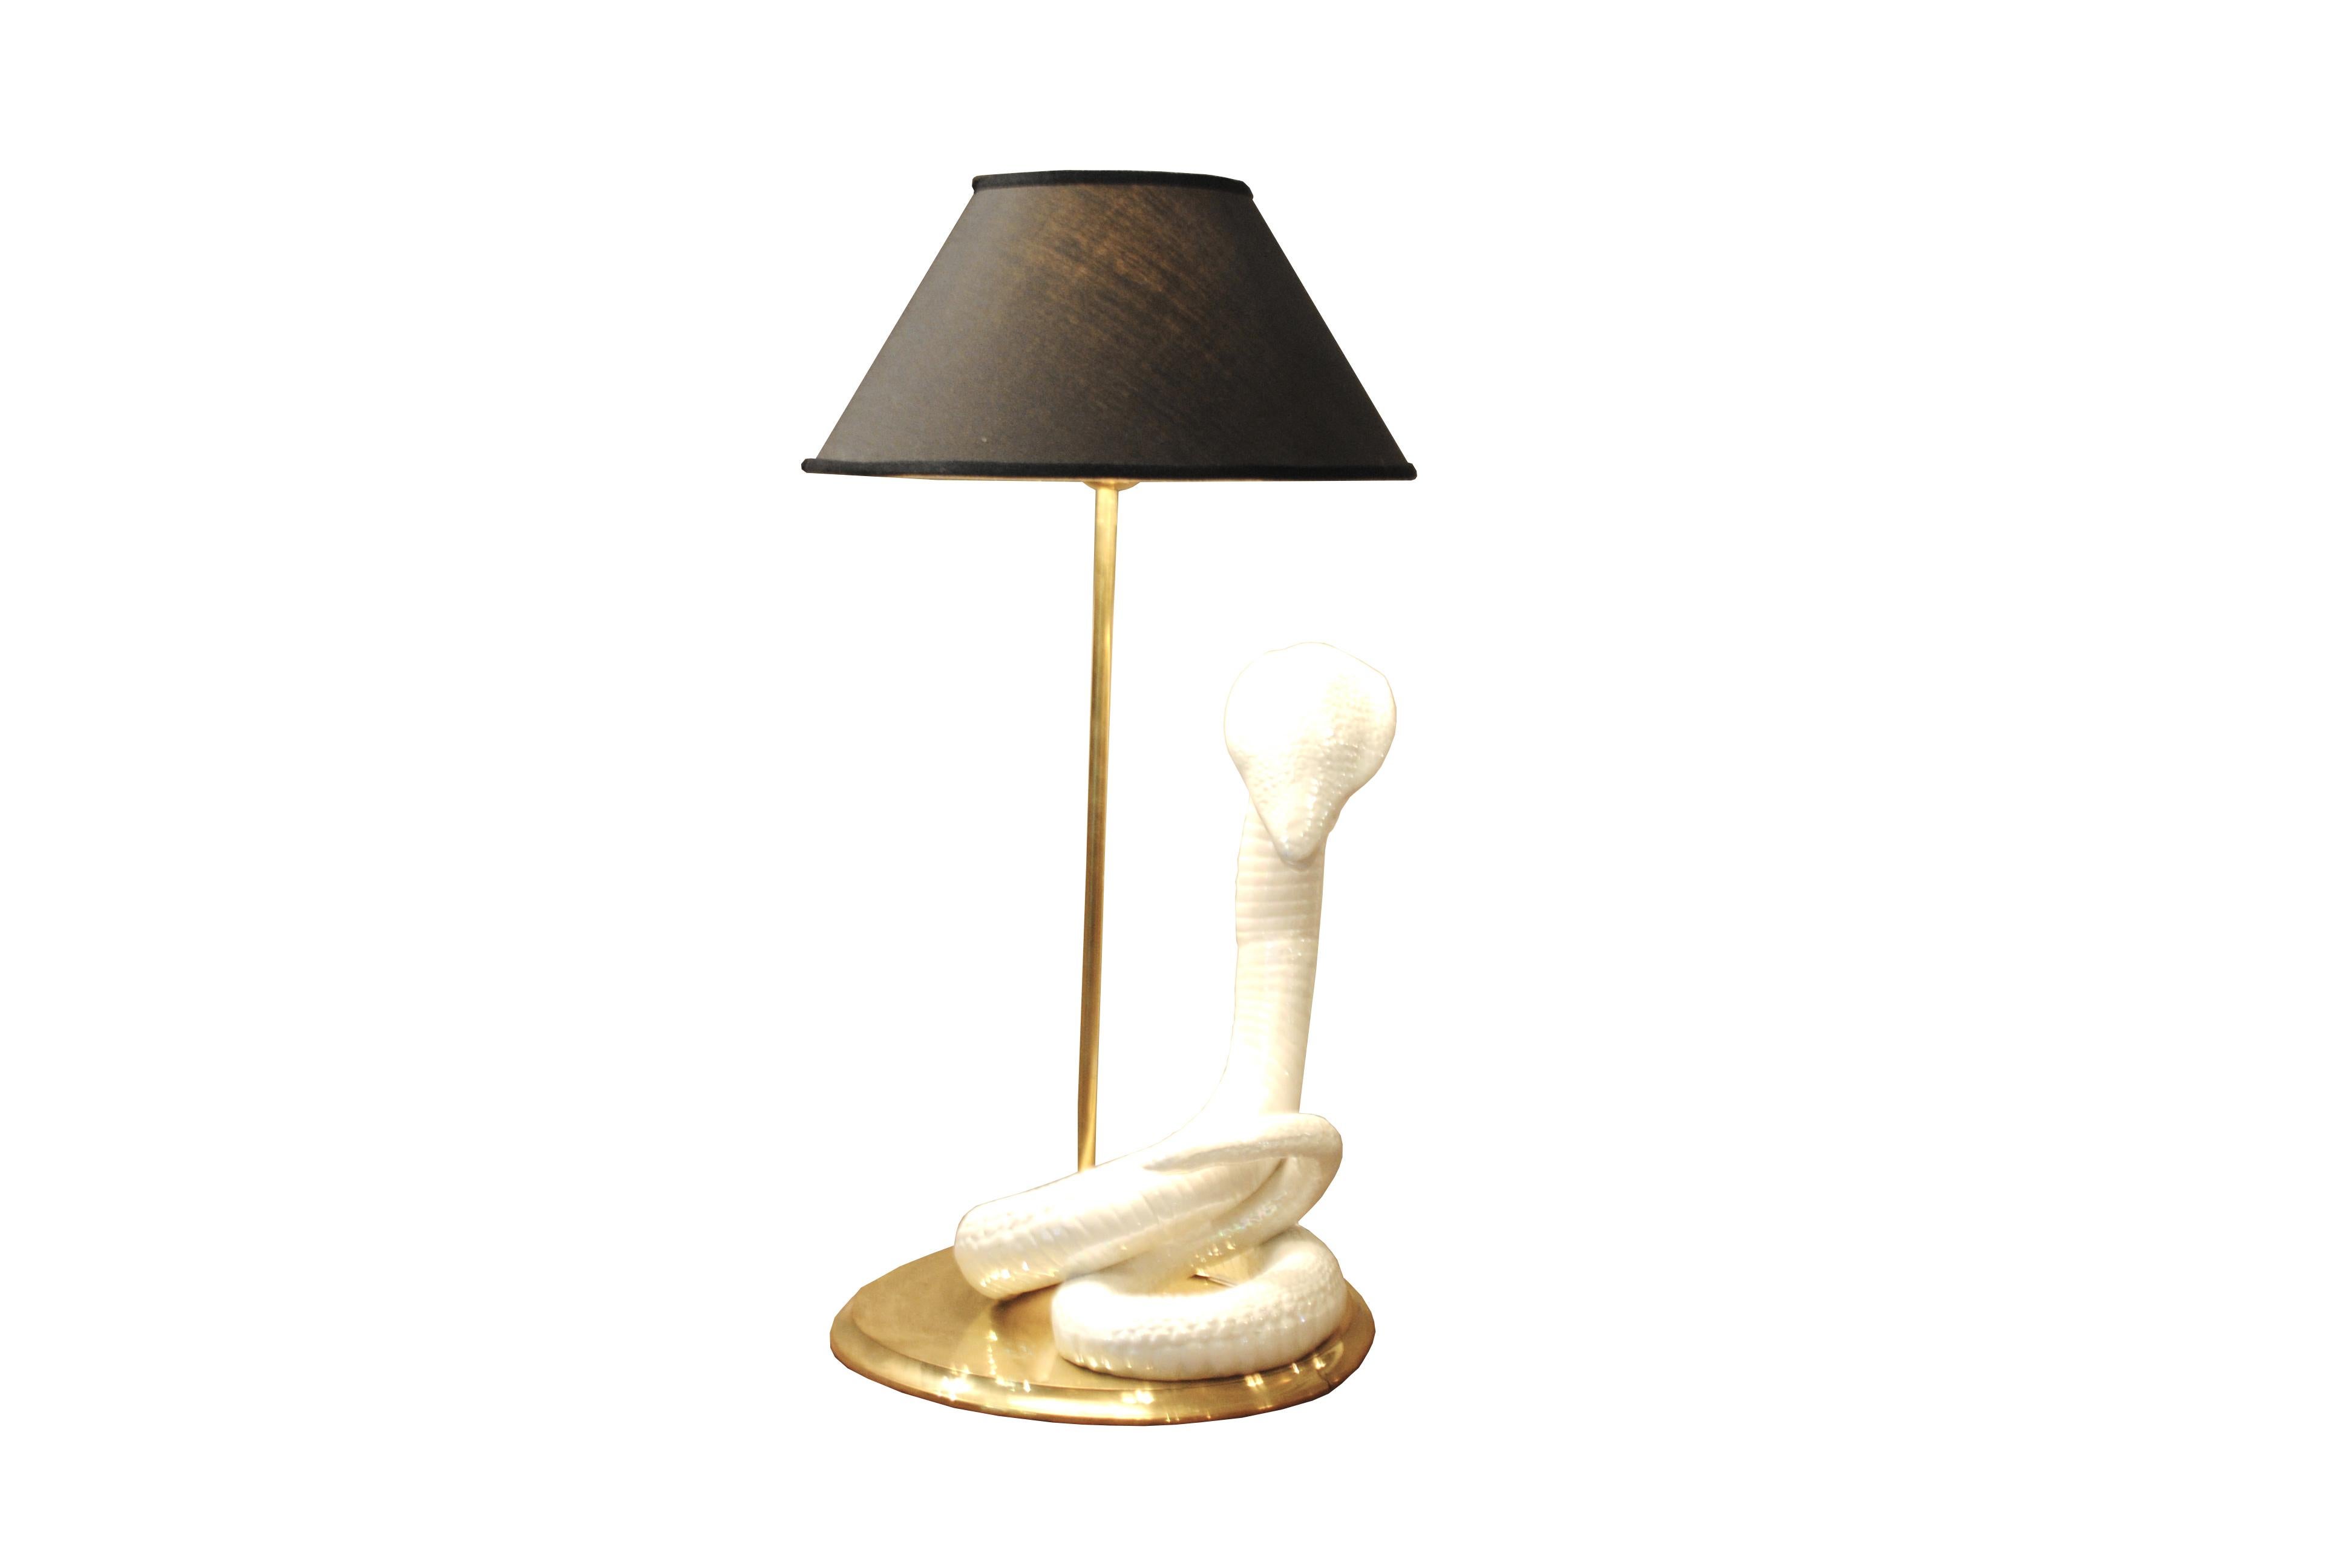 Nice table lamp in ceramic and brass a cobra refining, by the Italian designer Tommaso Barbi.